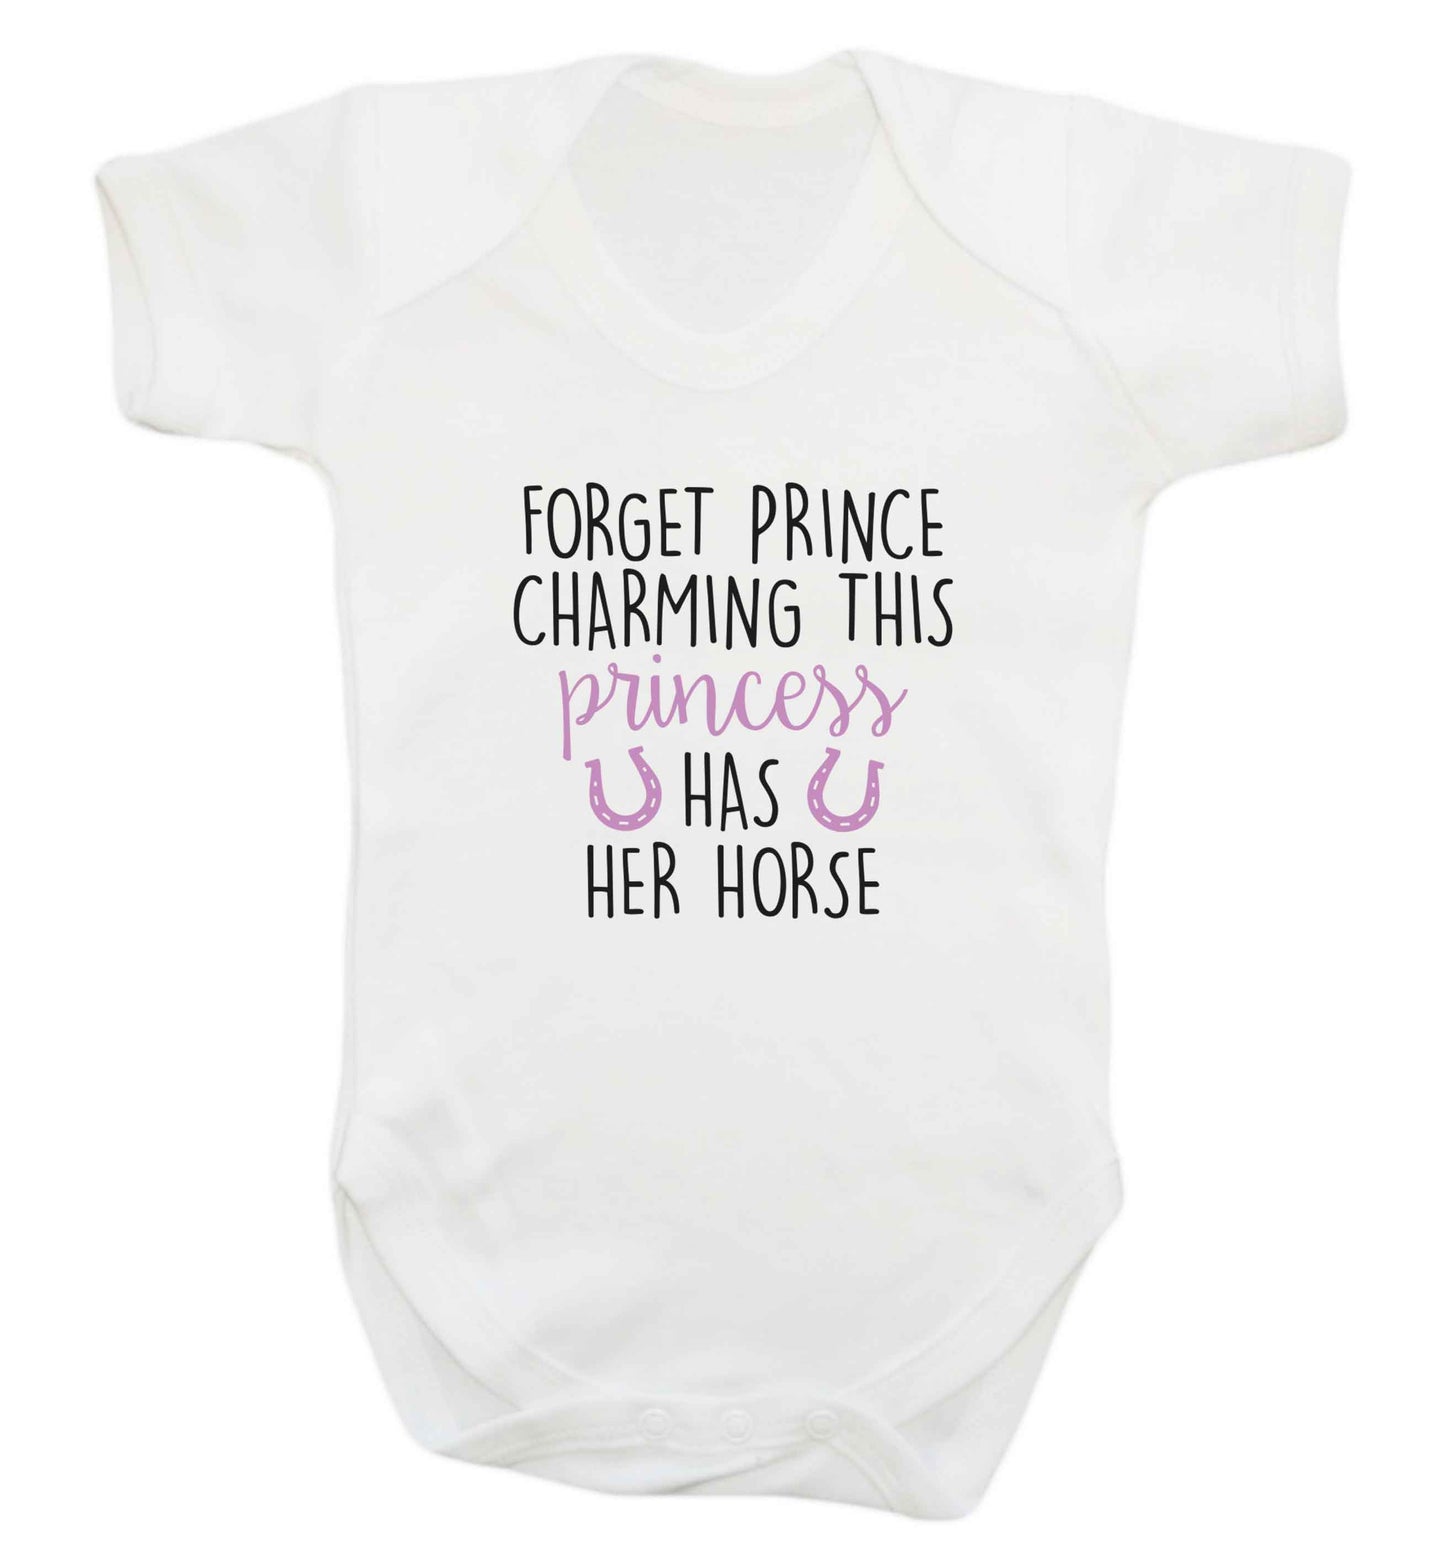 Forget prince charming this princess has her horse baby vest white 18-24 months